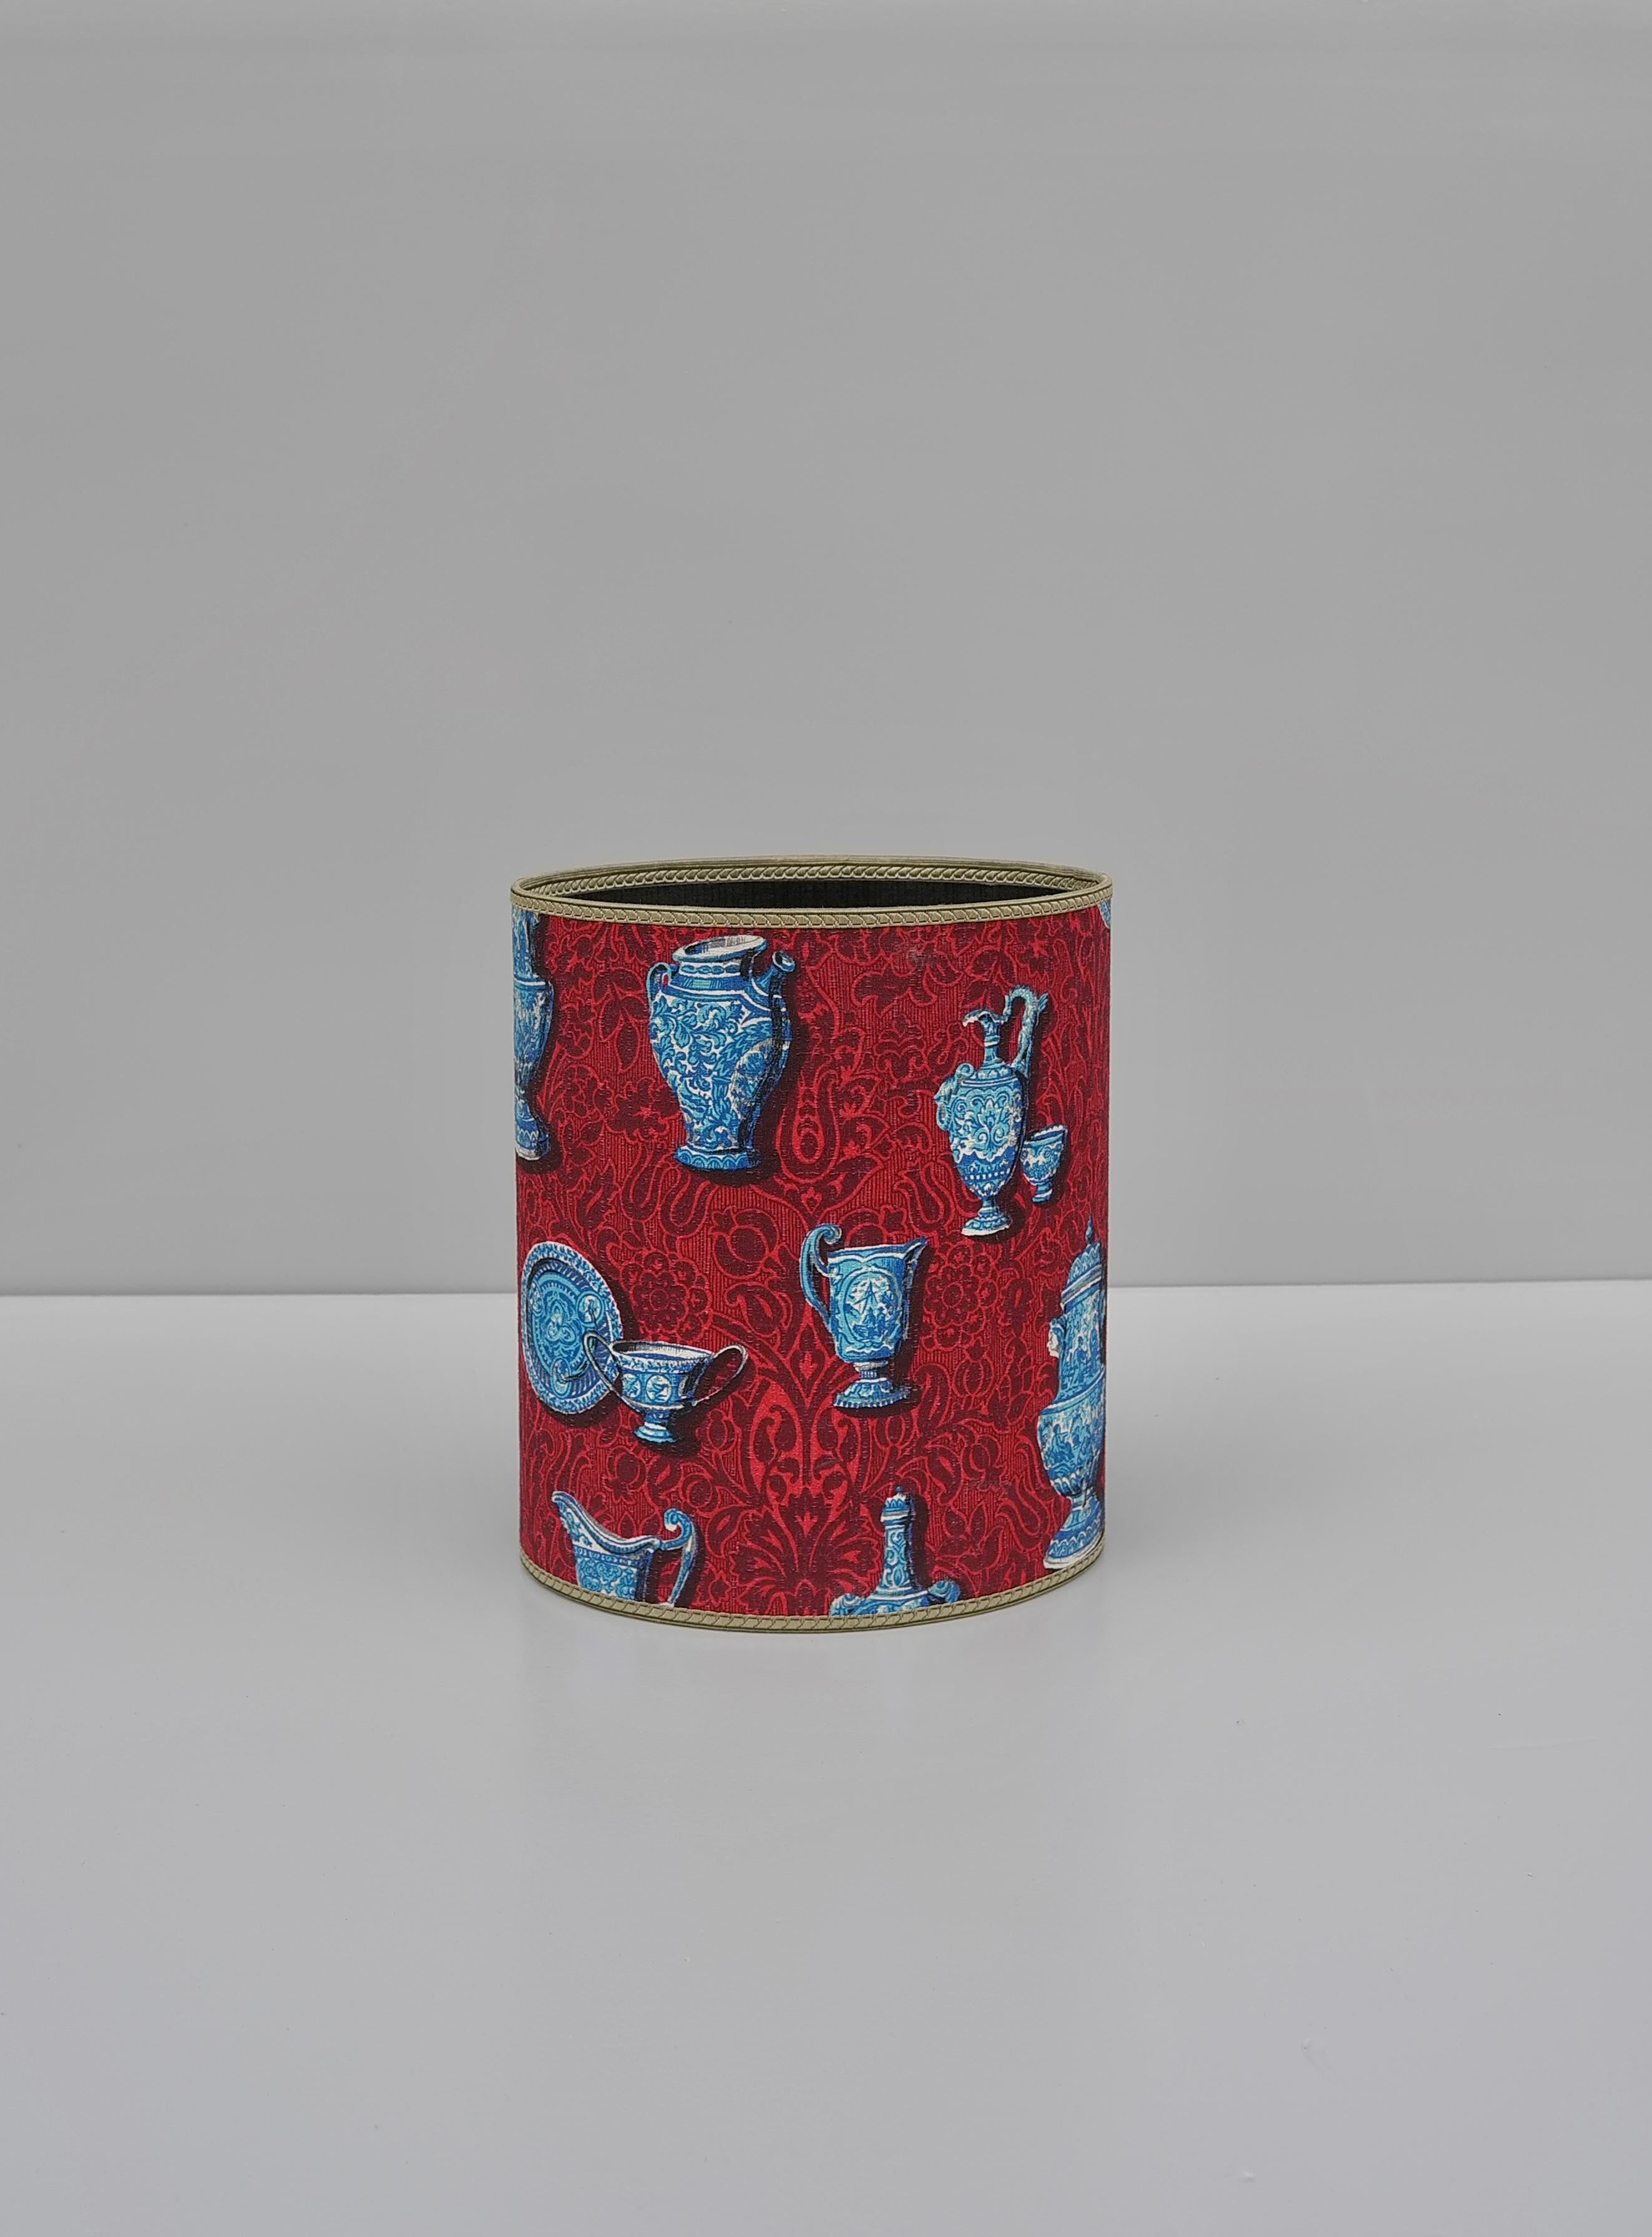 Oval Wastebasket in style of Piero Fornasetti, By Lucari 1950s, in Porcelain China fabric.